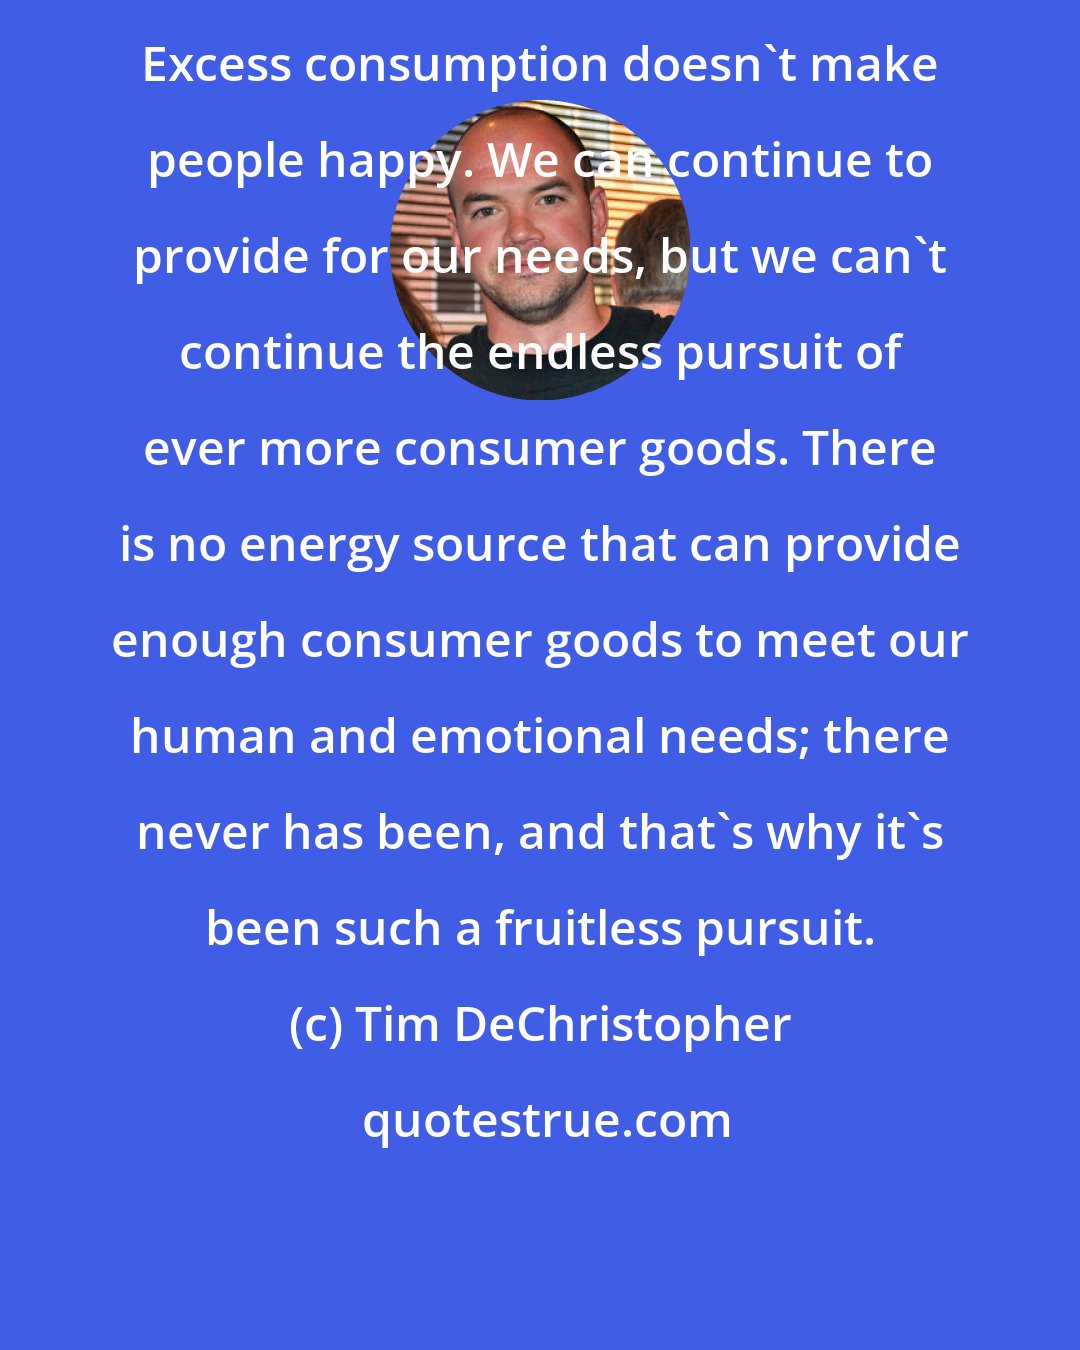 Tim DeChristopher: Excess consumption doesn't make people happy. We can continue to provide for our needs, but we can't continue the endless pursuit of ever more consumer goods. There is no energy source that can provide enough consumer goods to meet our human and emotional needs; there never has been, and that's why it's been such a fruitless pursuit.